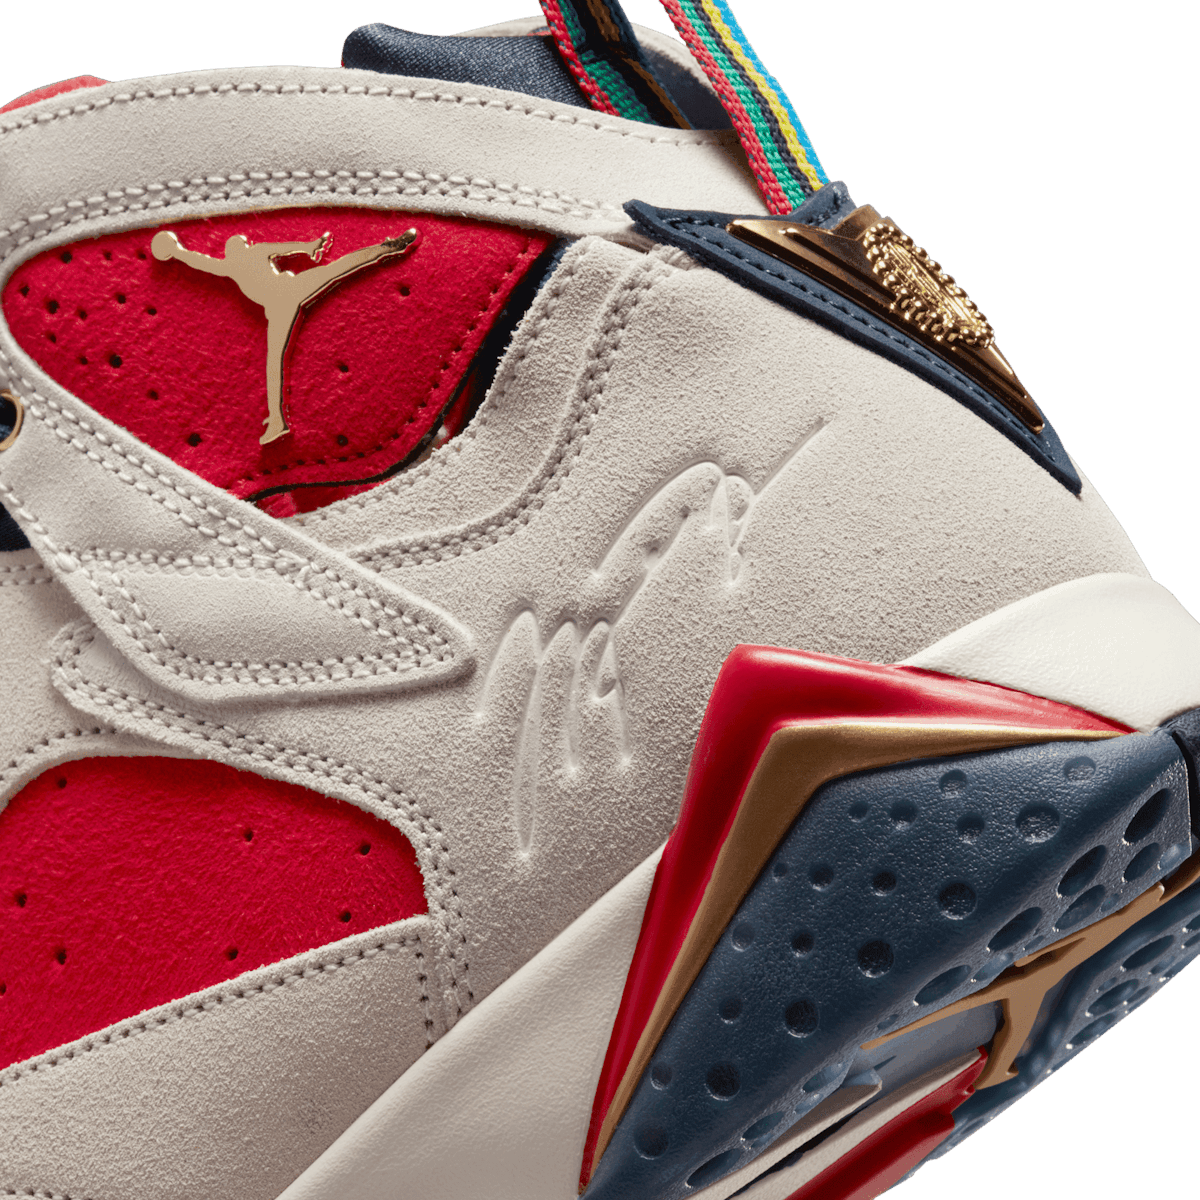 Jordan 7 Trophy Room New Sheriff in Town Angle 5